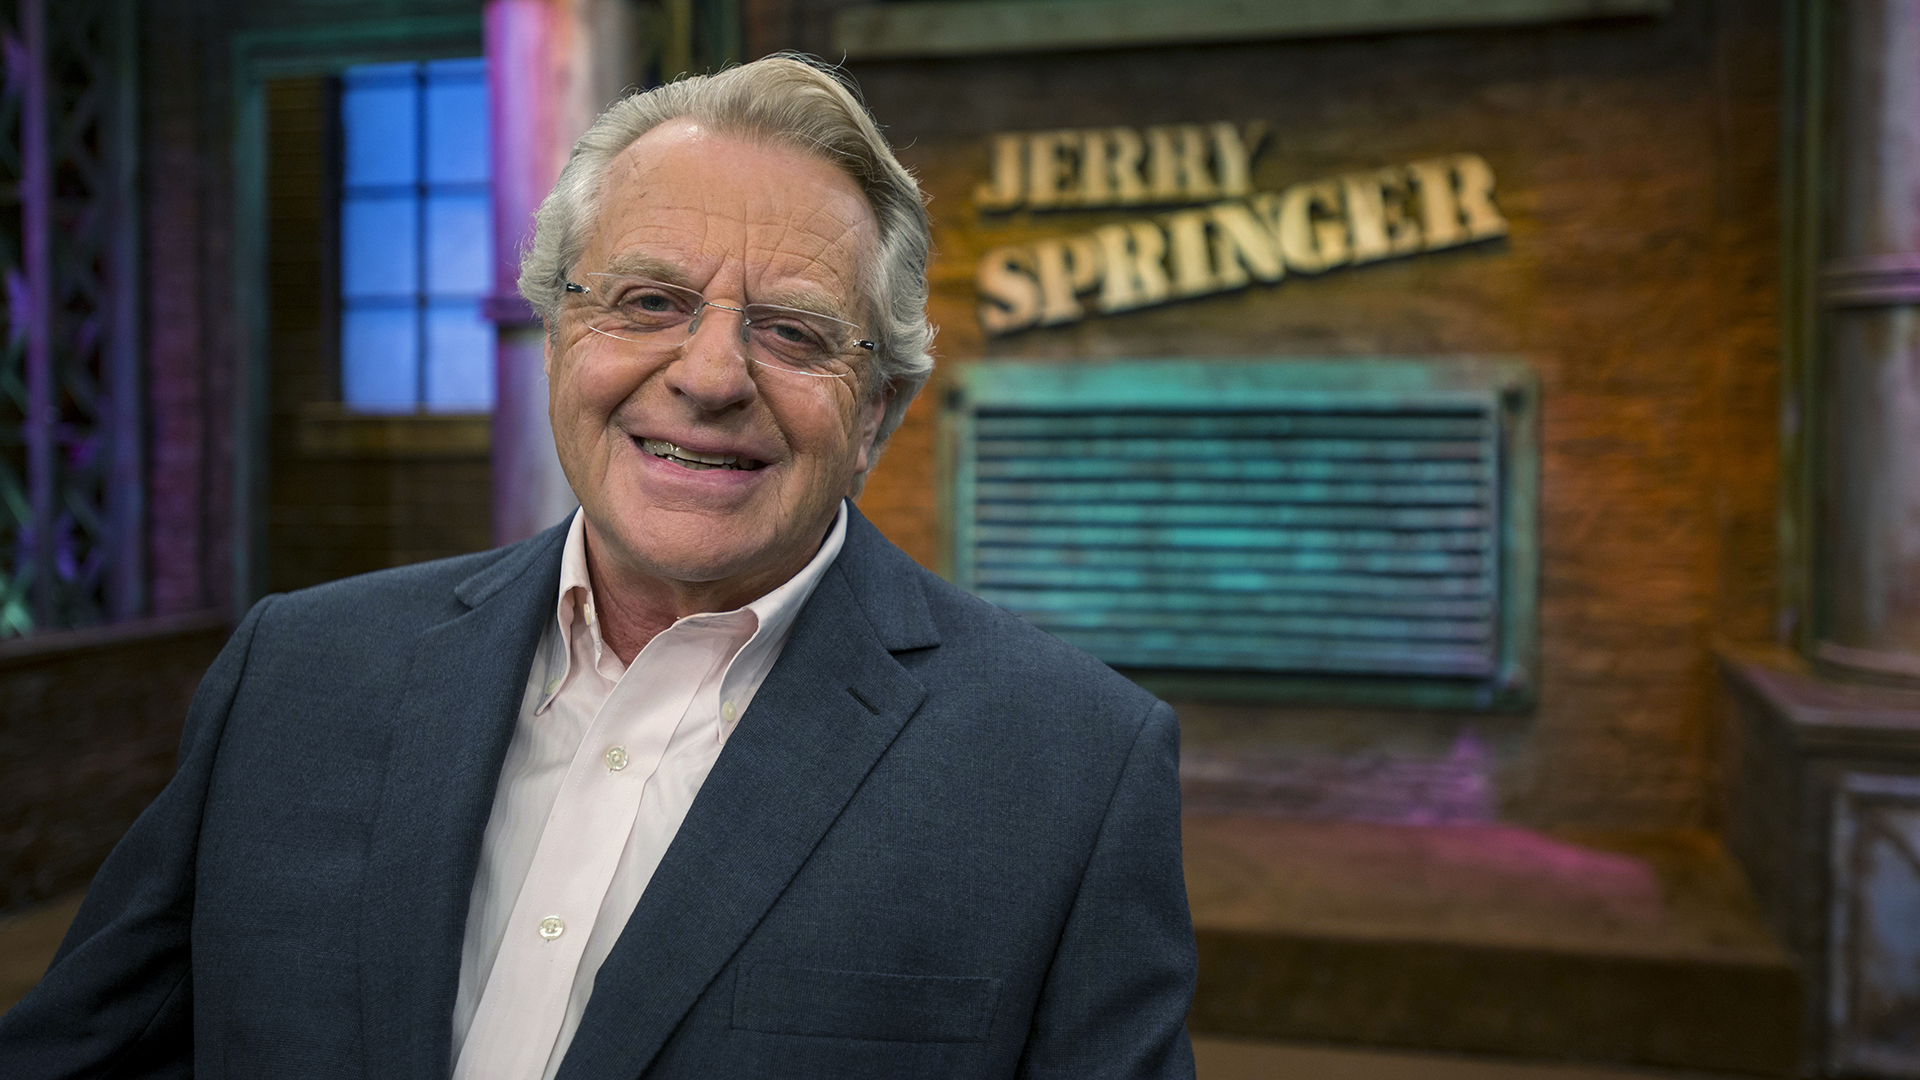 Jerry springer dailymotion